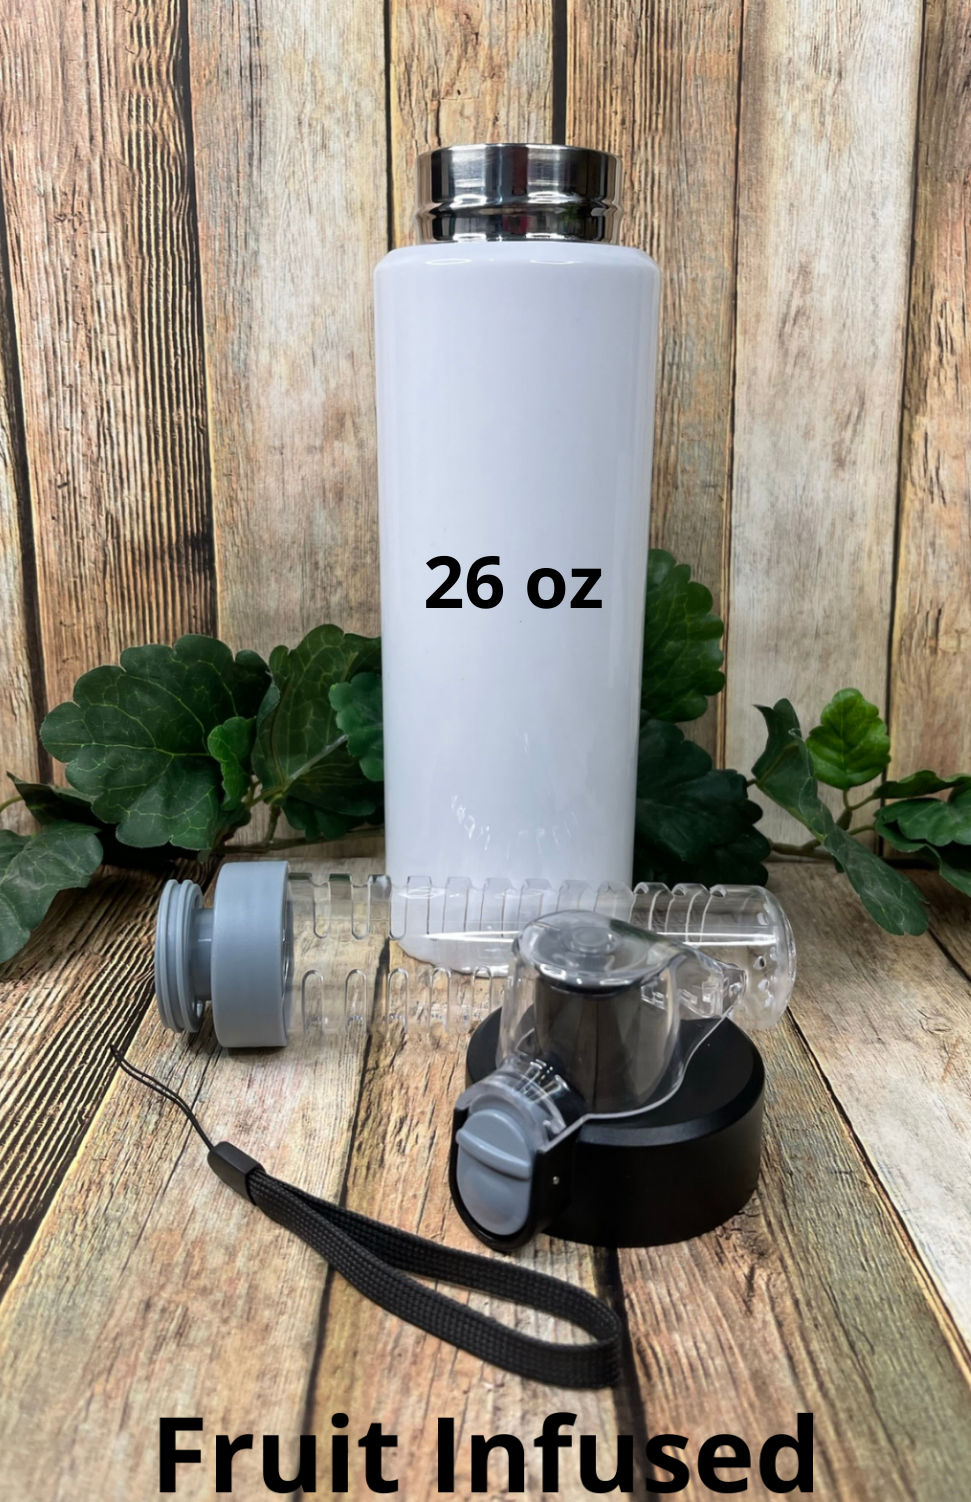 20 oz. White Reusable Stainless Steel Tumbler with Lid & Straw